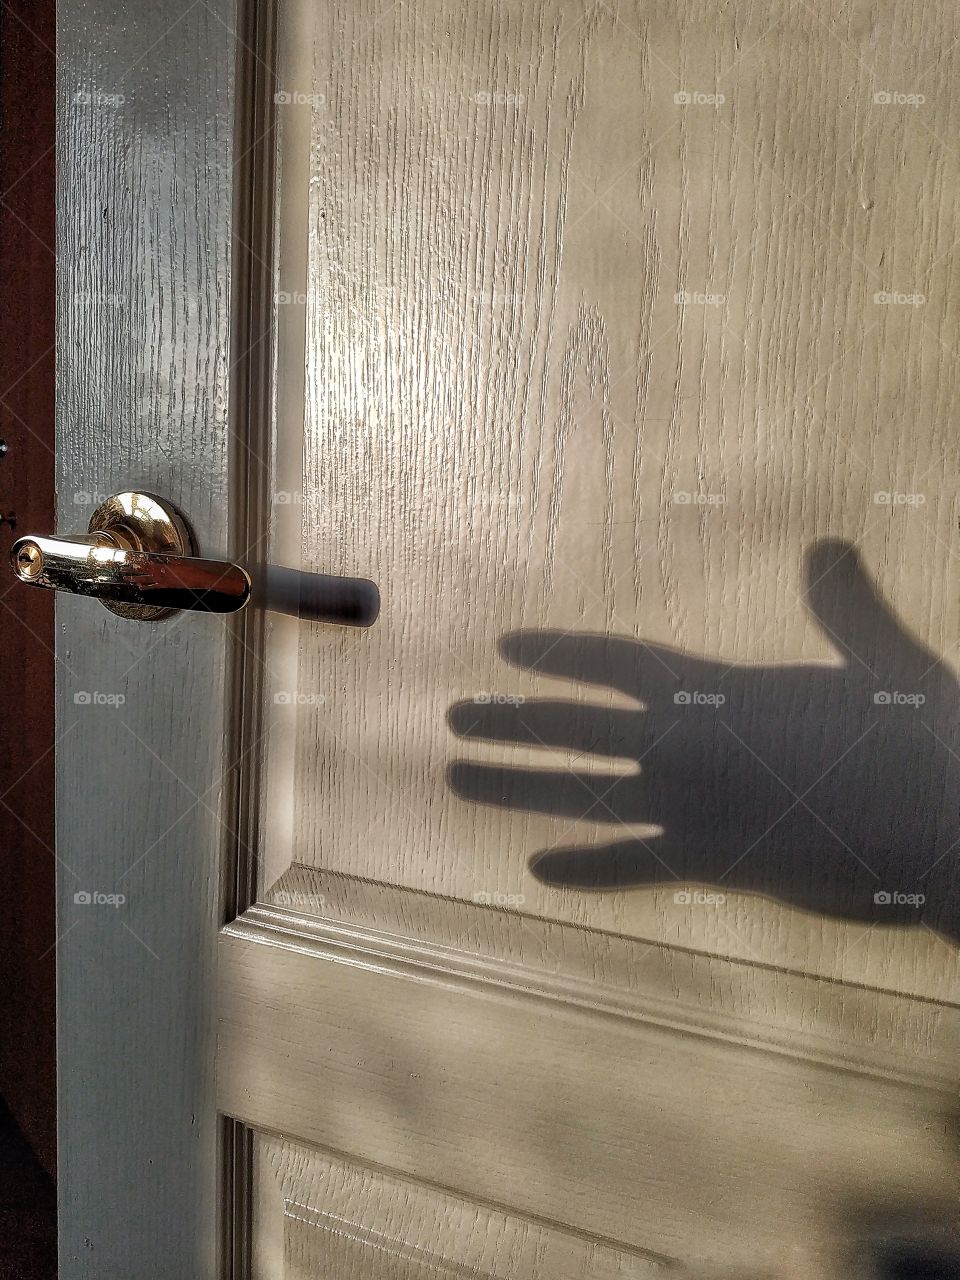 The shadow of a hand, reaching for the door handle